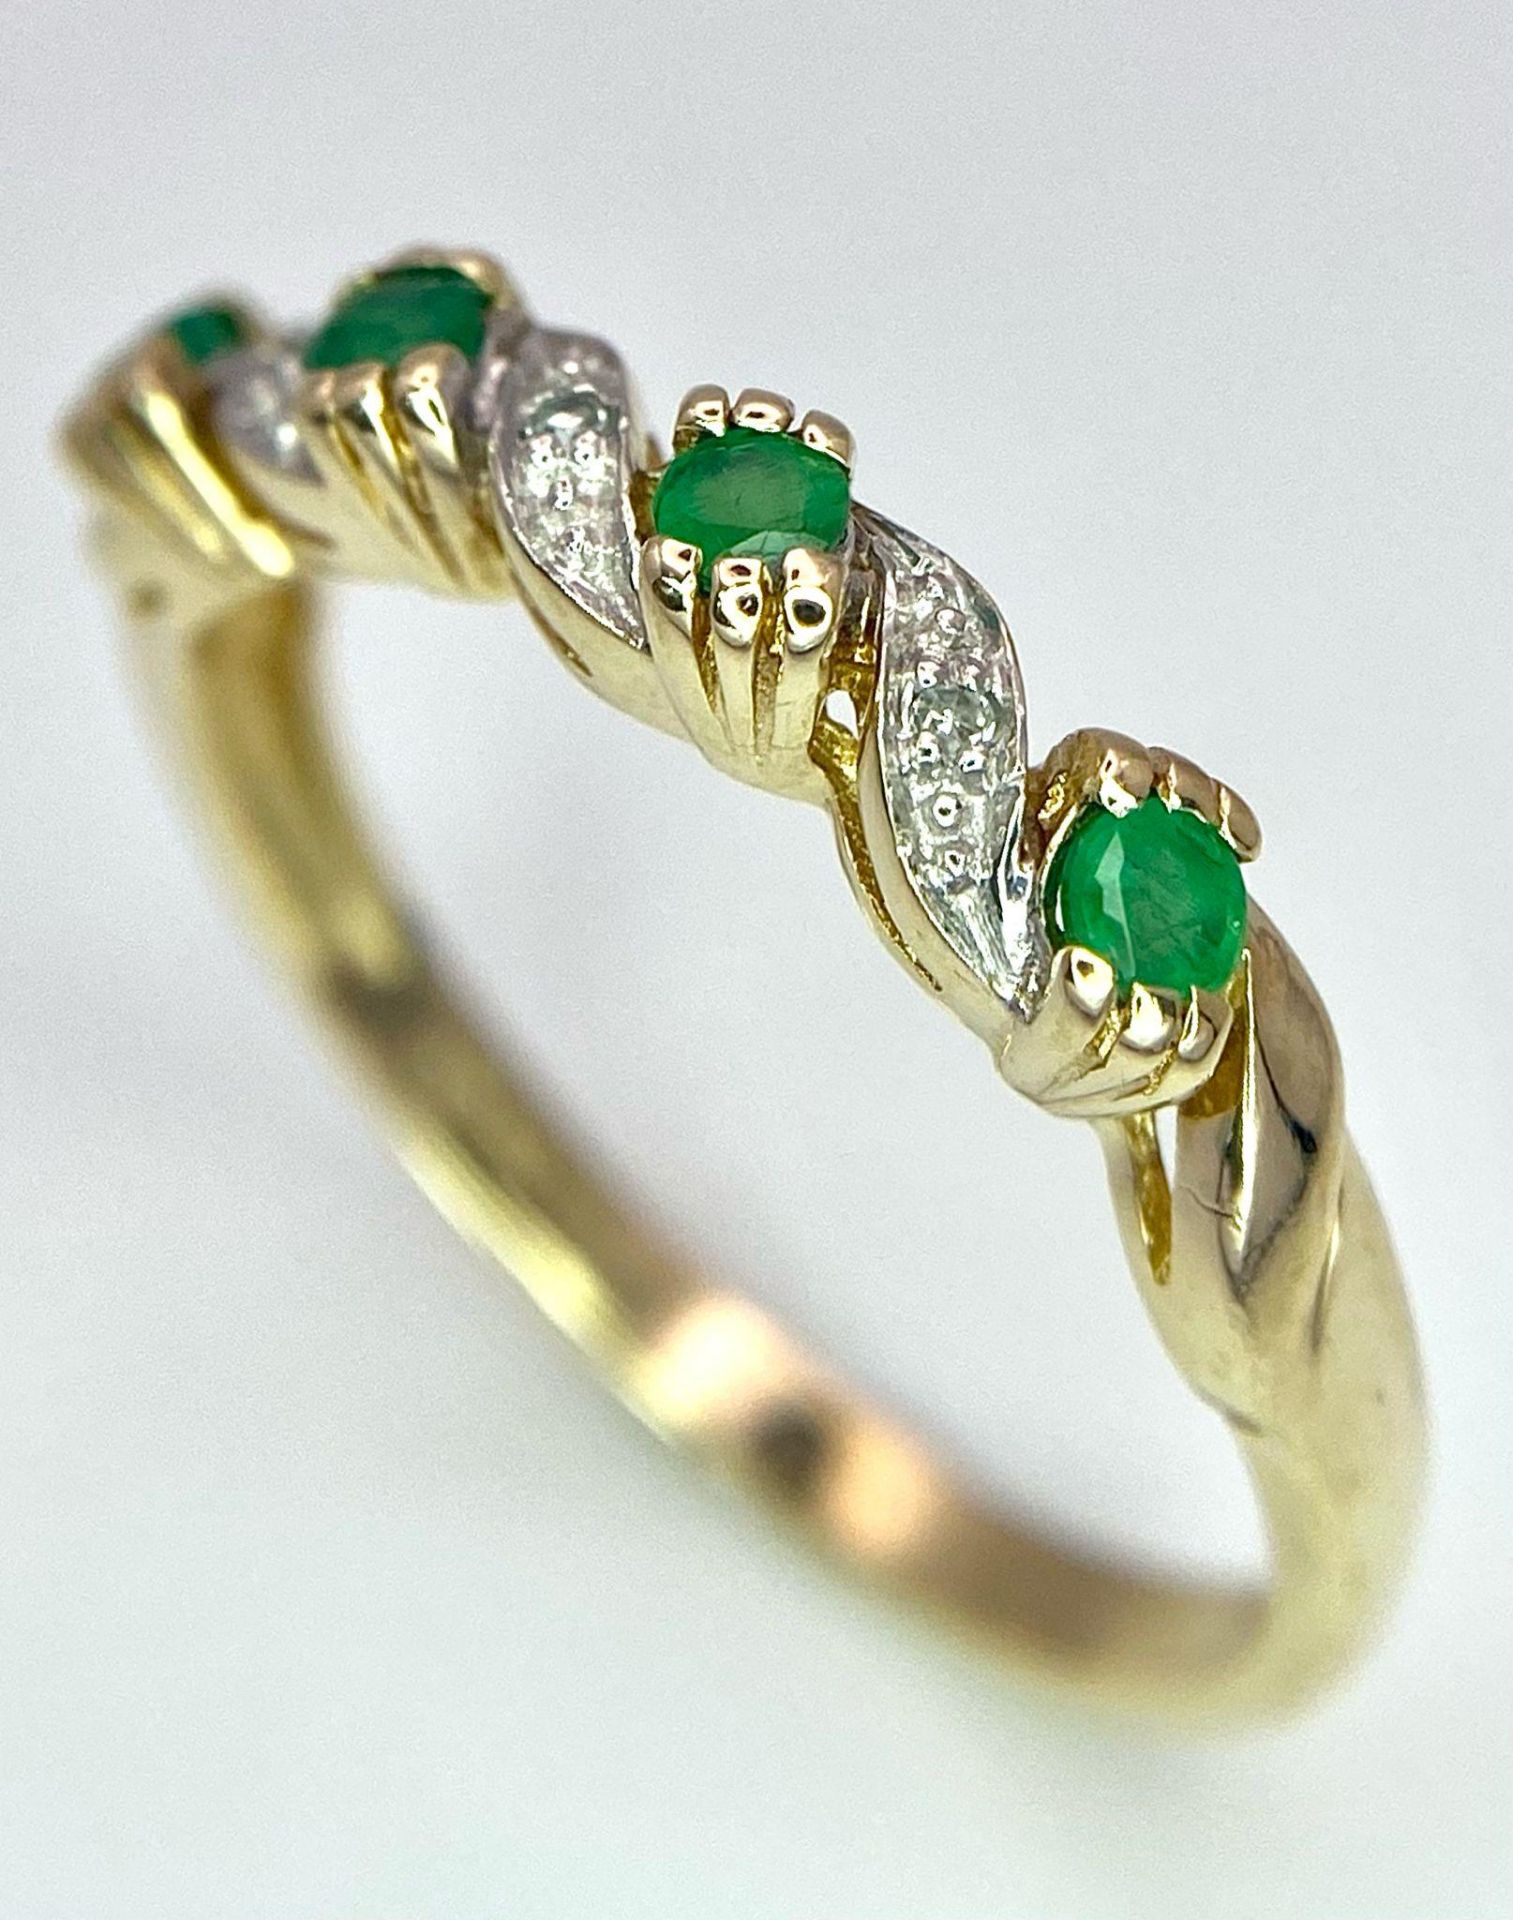 A 9K Yellow Gold Diamond and Emerald Ring. Size P, 2g total weight. Ref: 8446 - Image 5 of 13